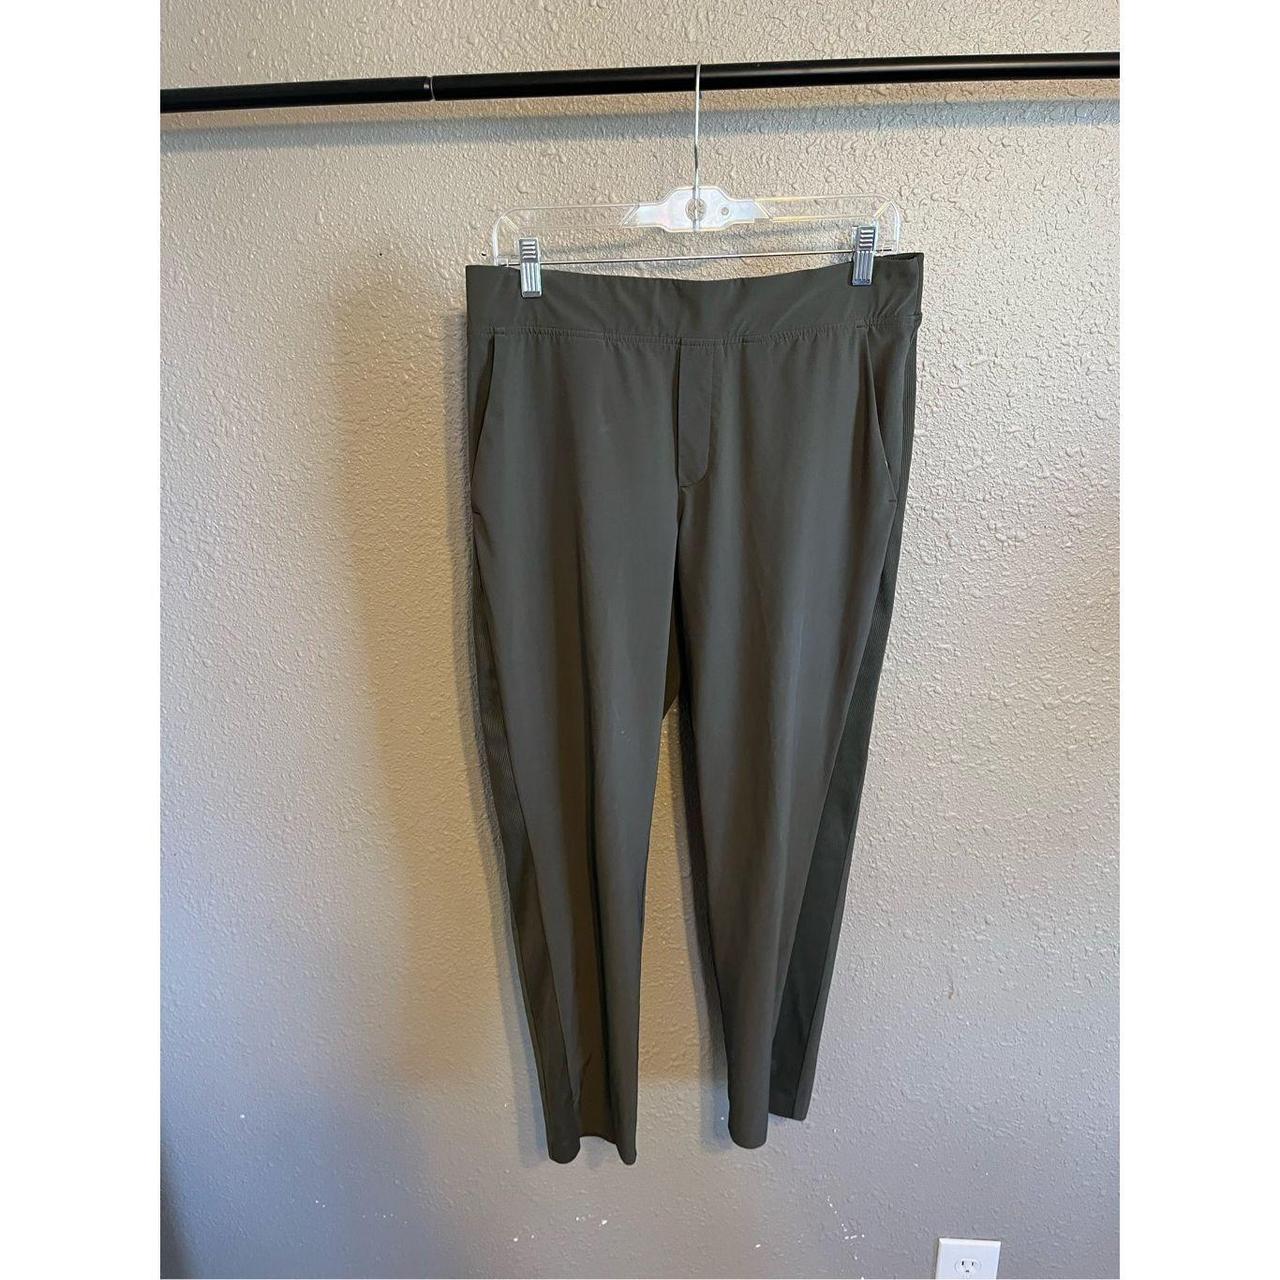 Athleta Brooklyn Ankle Pant in army green. Size 10. - Depop